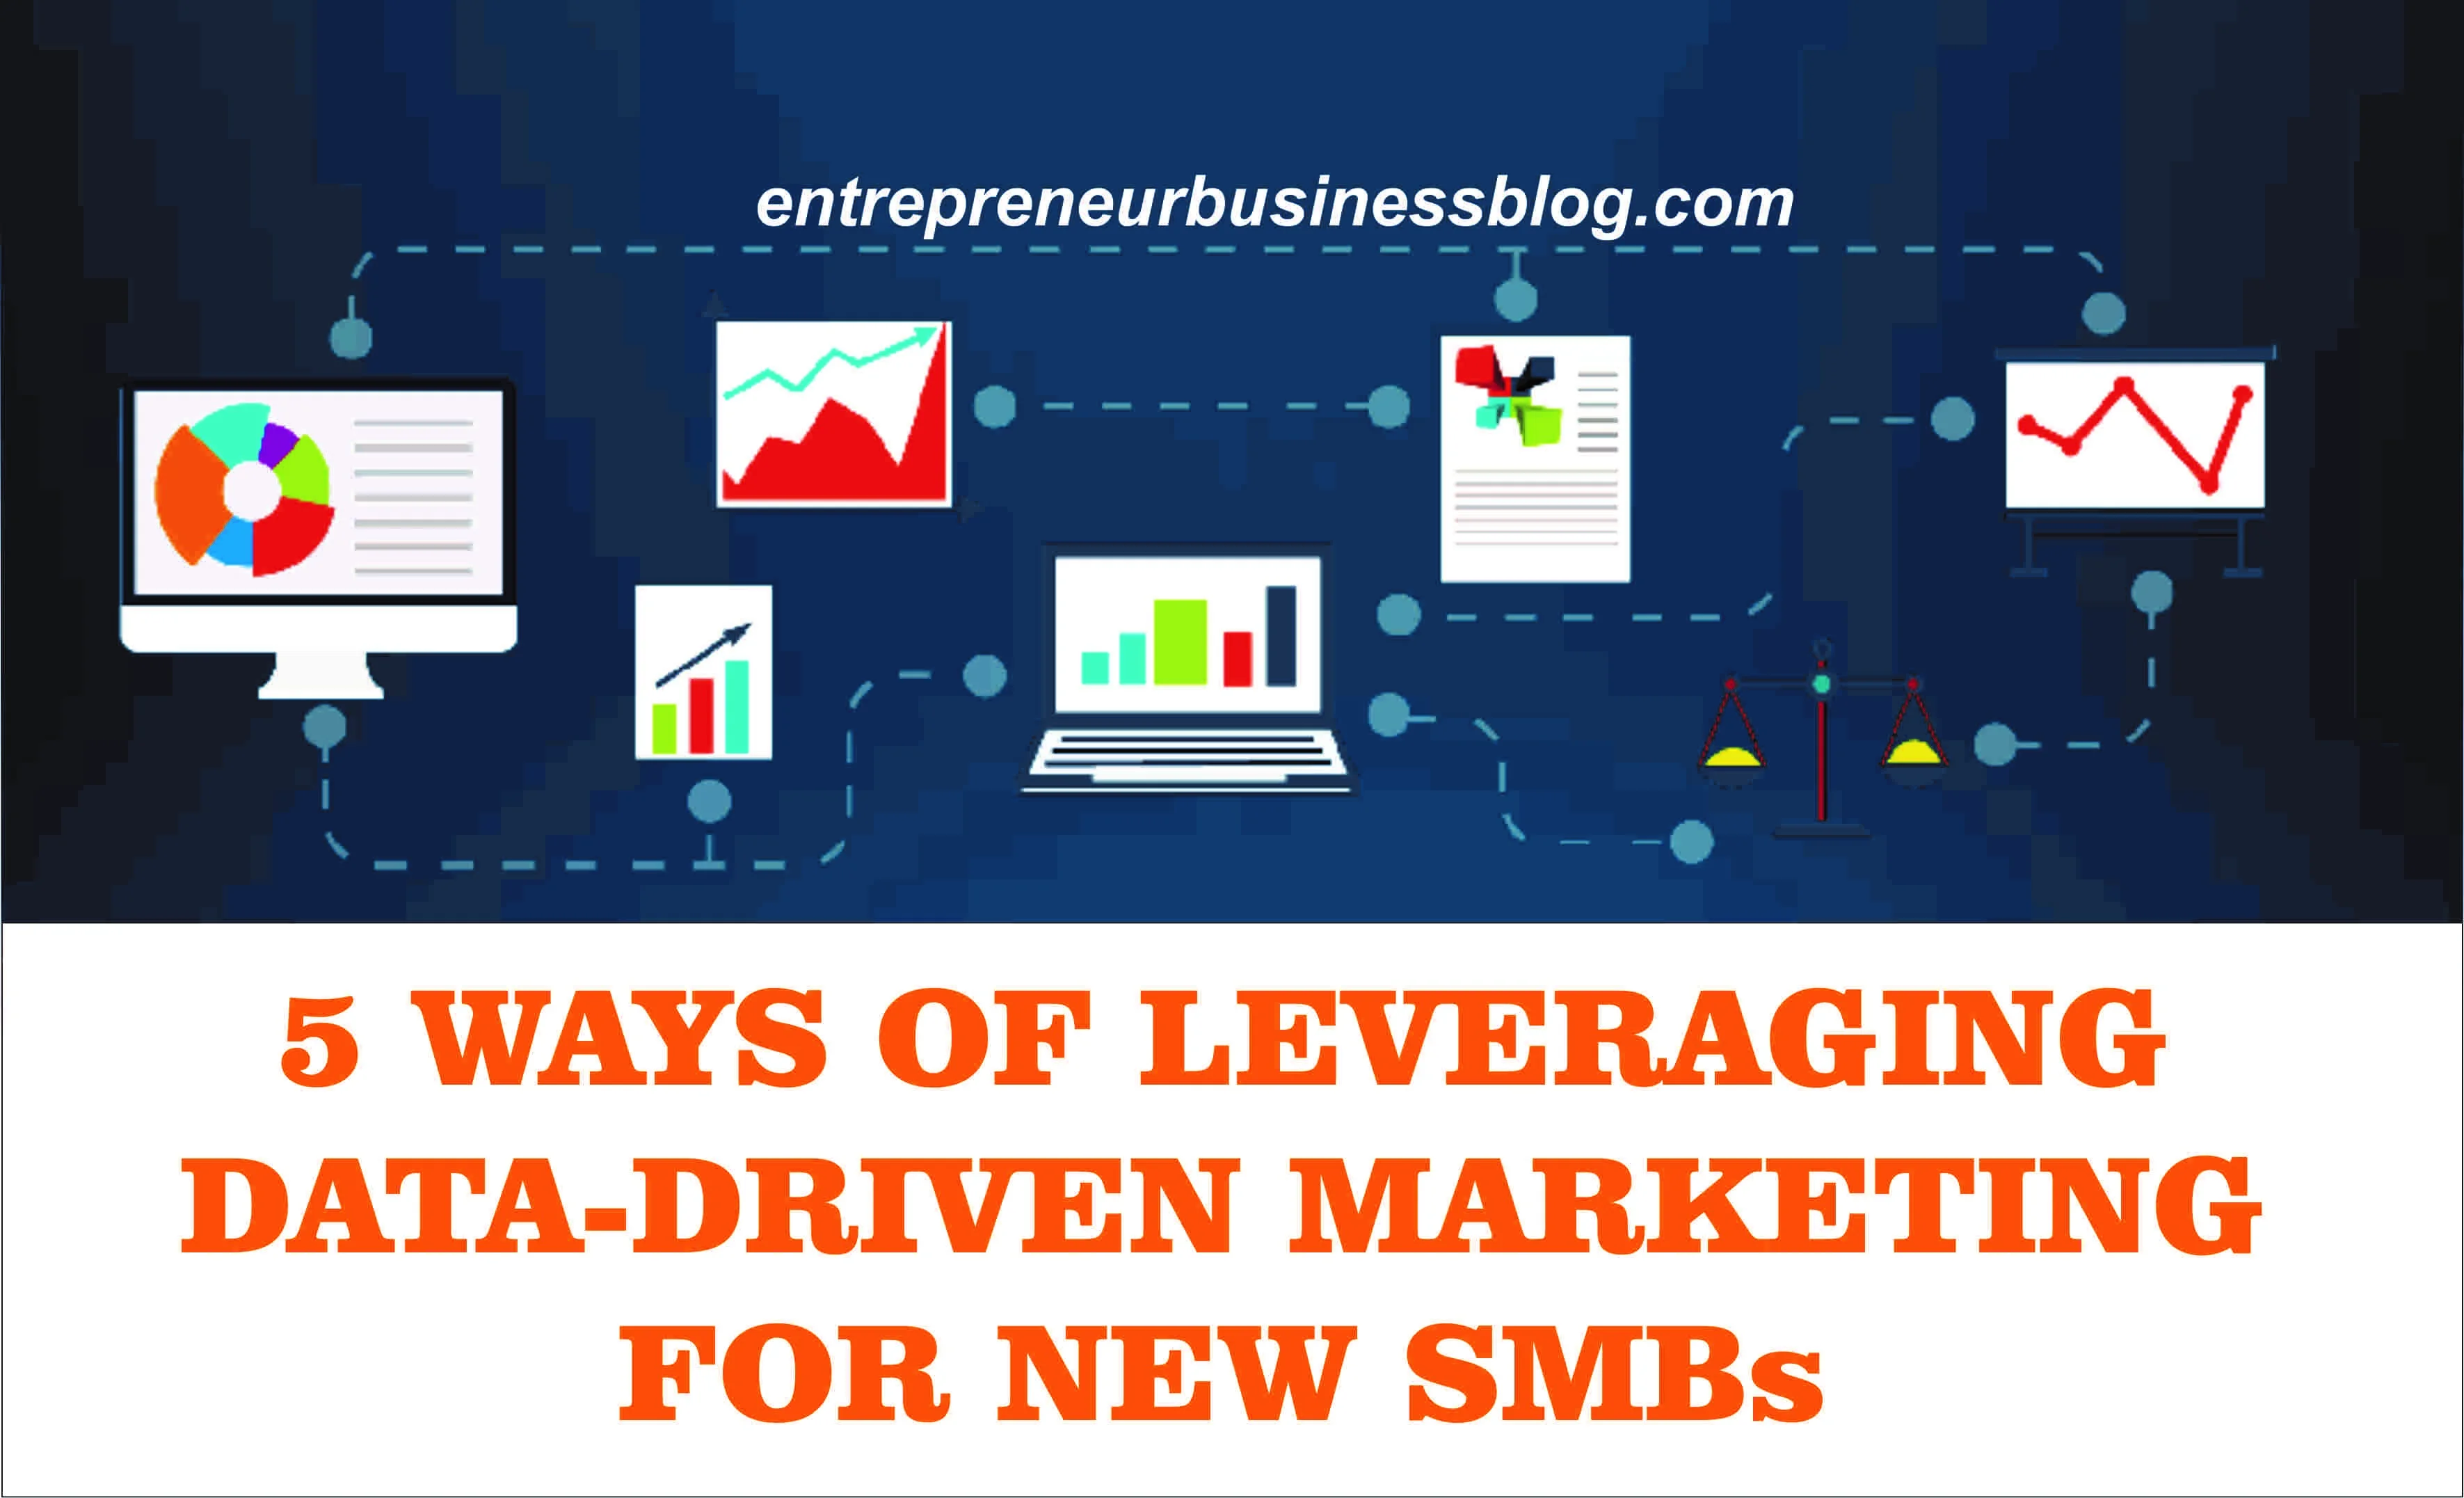 Data-driven marketing for new SMBs